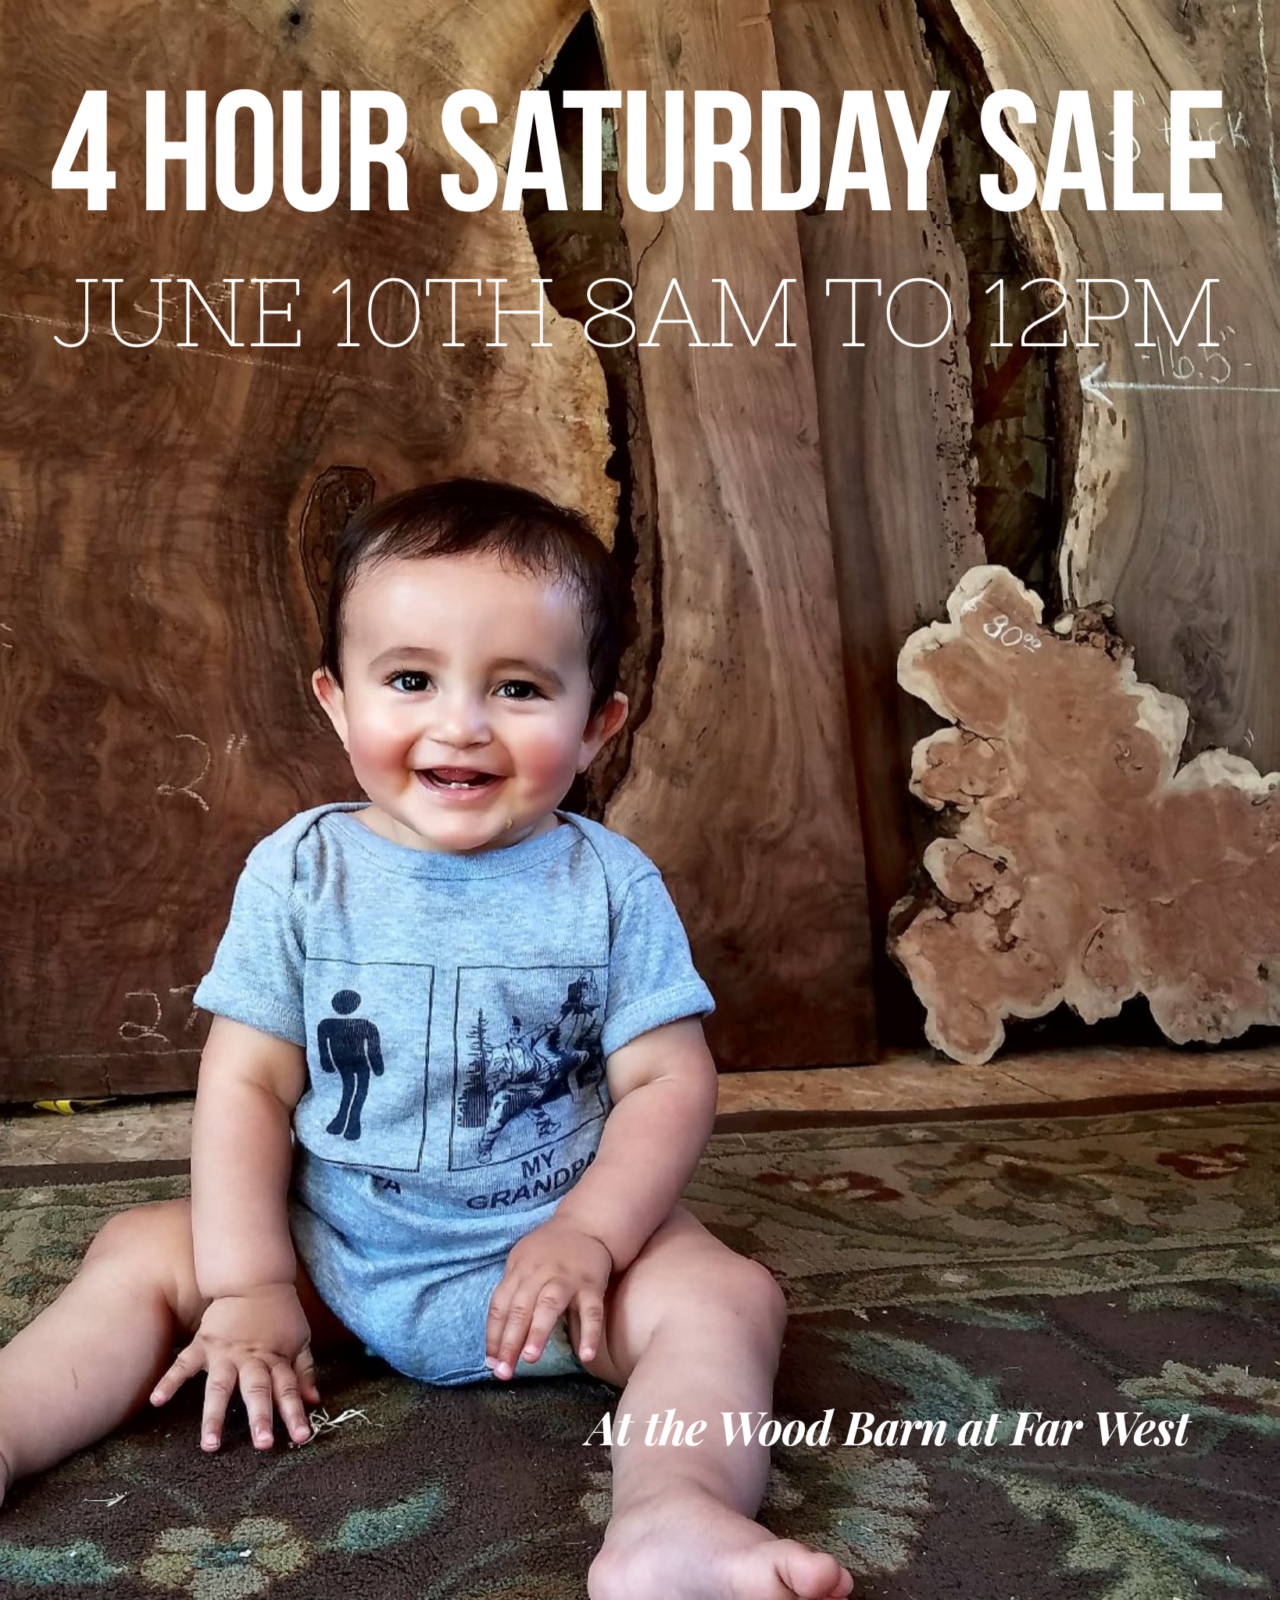 Cute baby in front of walnut lumber for Saturday 4 hour lumber sale June 10th from 8am to 12noon